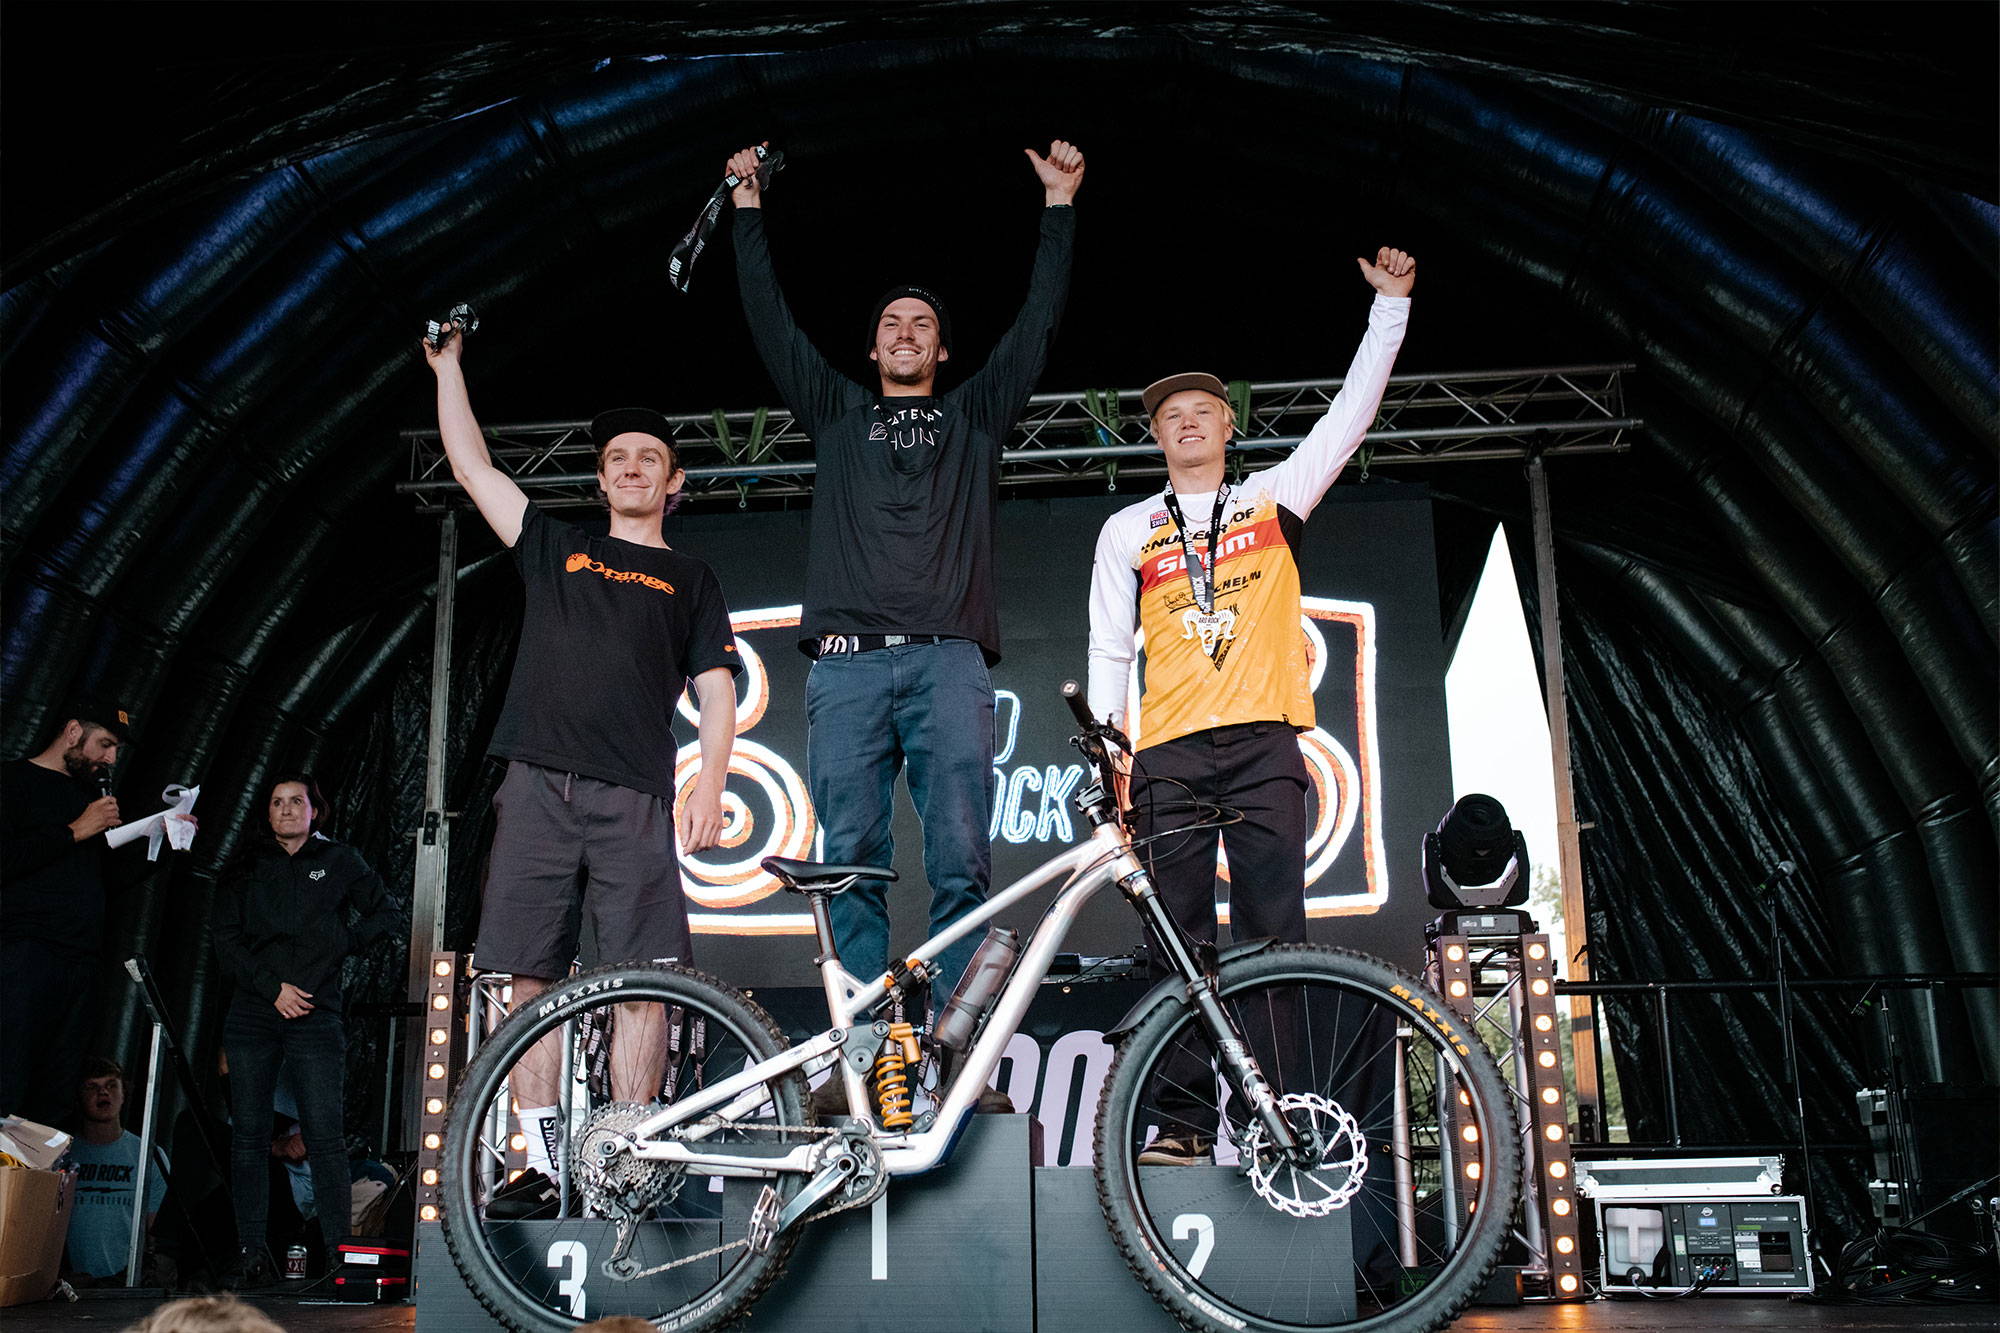 Joe Connell on the podium at Ard Rock